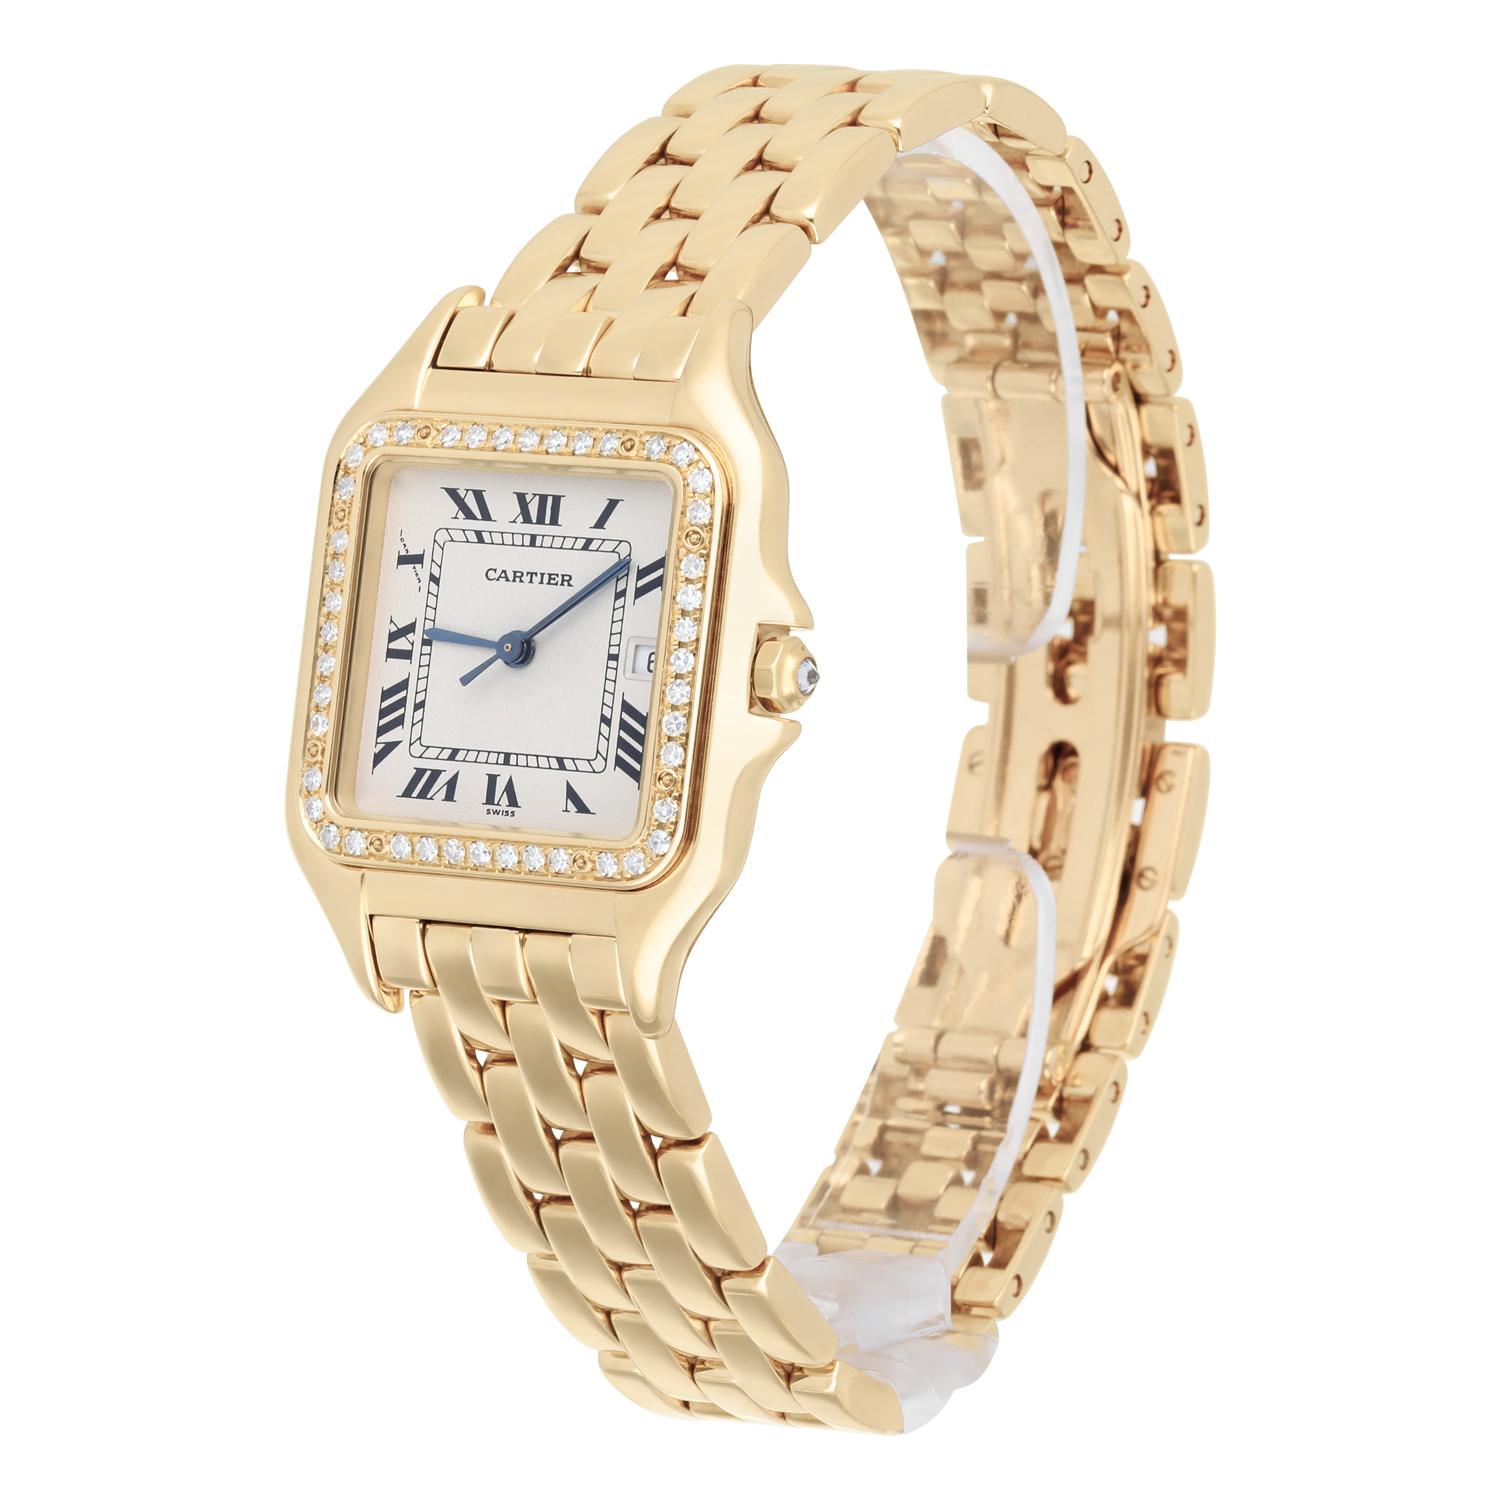 Cartier Panthere 29mm Ladies Large 18K Yellow Gold Watch with Diamonds 887968 In Excellent Condition For Sale In New York, NY